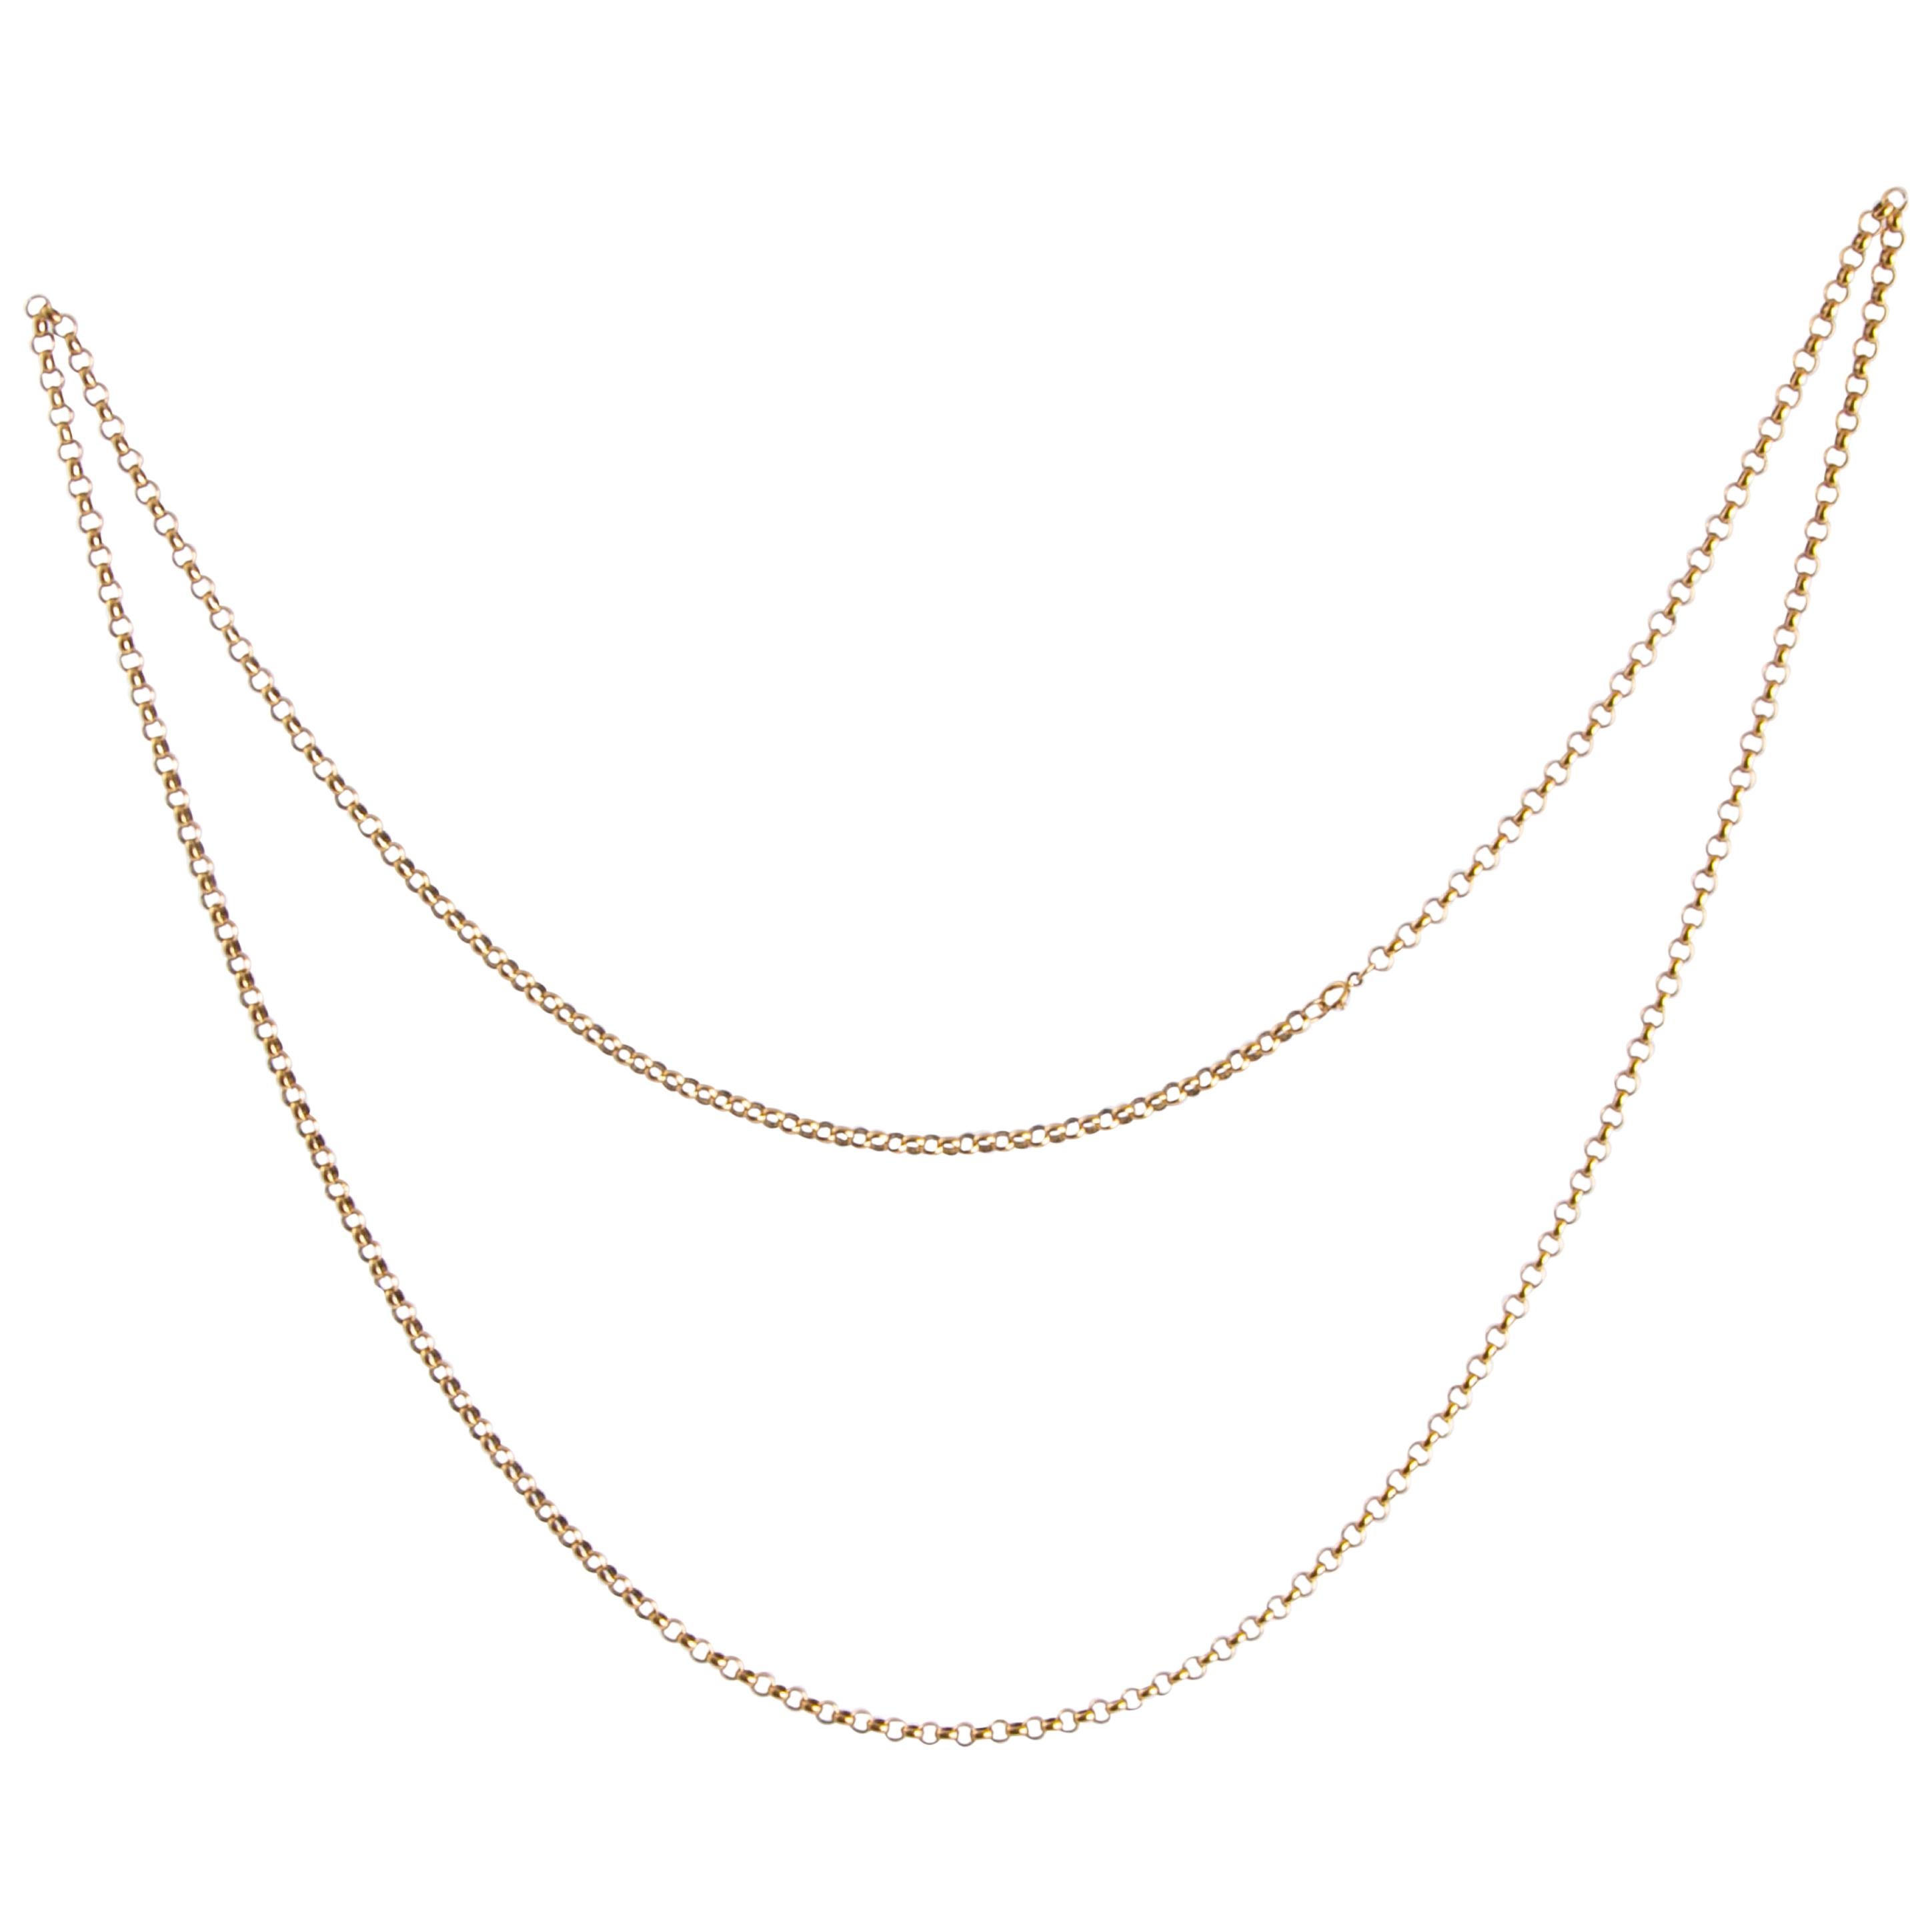 Foundrae Small Belcher Chain Mini Chubby Annex Link Necklace